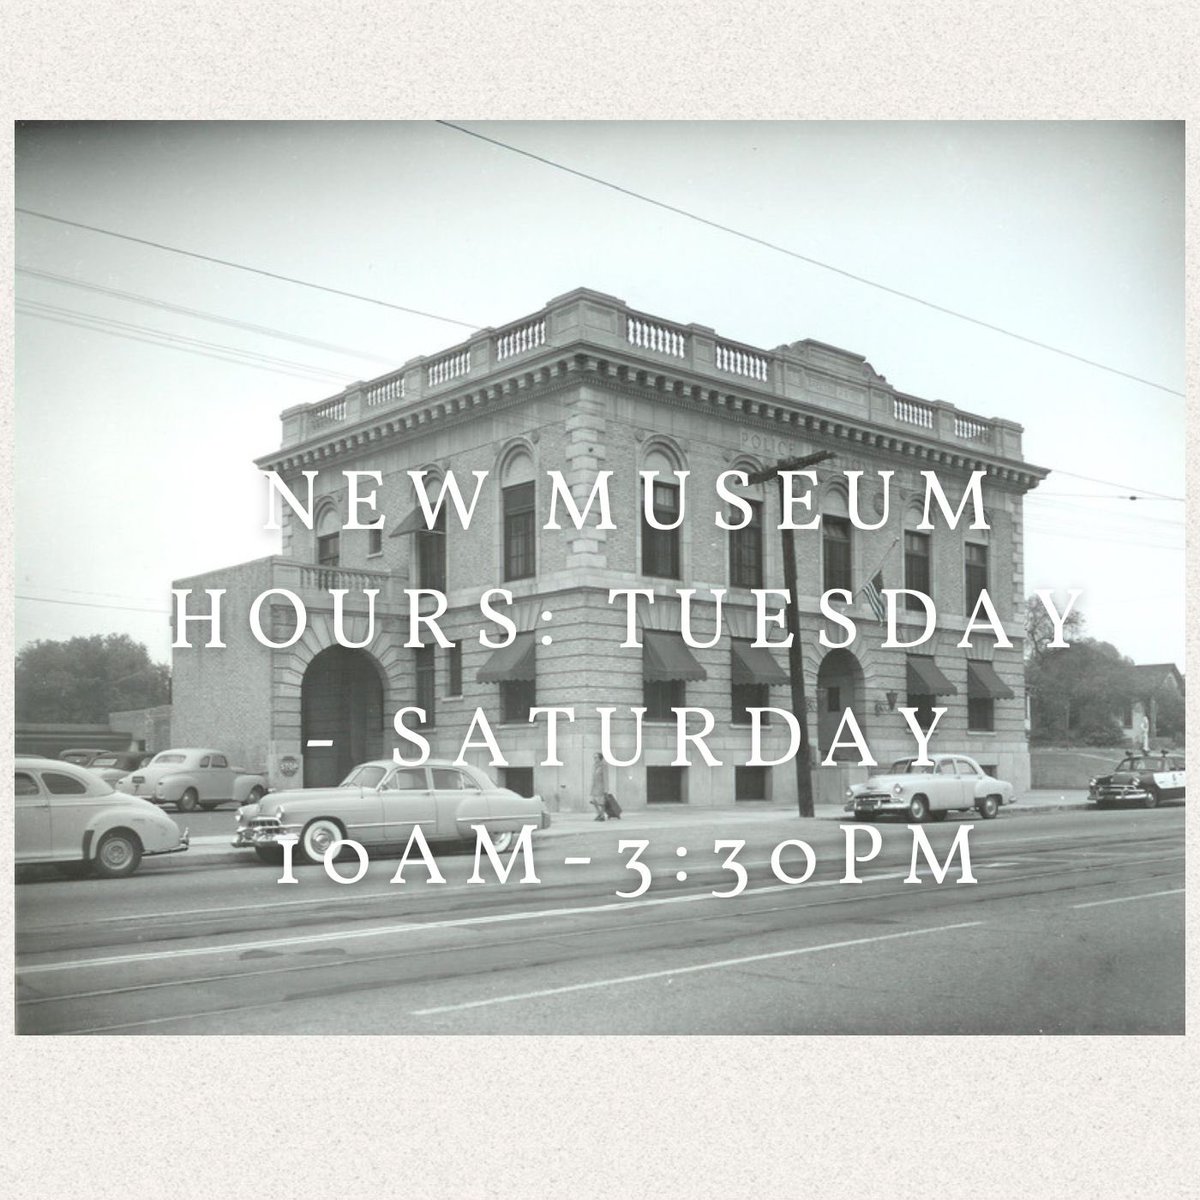 We are fully back open starting this week! Come visit us and take your tour Tuesday- Saturday between 10am - 3:30 pm 🚔 See you soon! 

#losangeles #lamuseum #lapdhistory #policemuseum #museumtour #tour #highlandpark #history #lapd